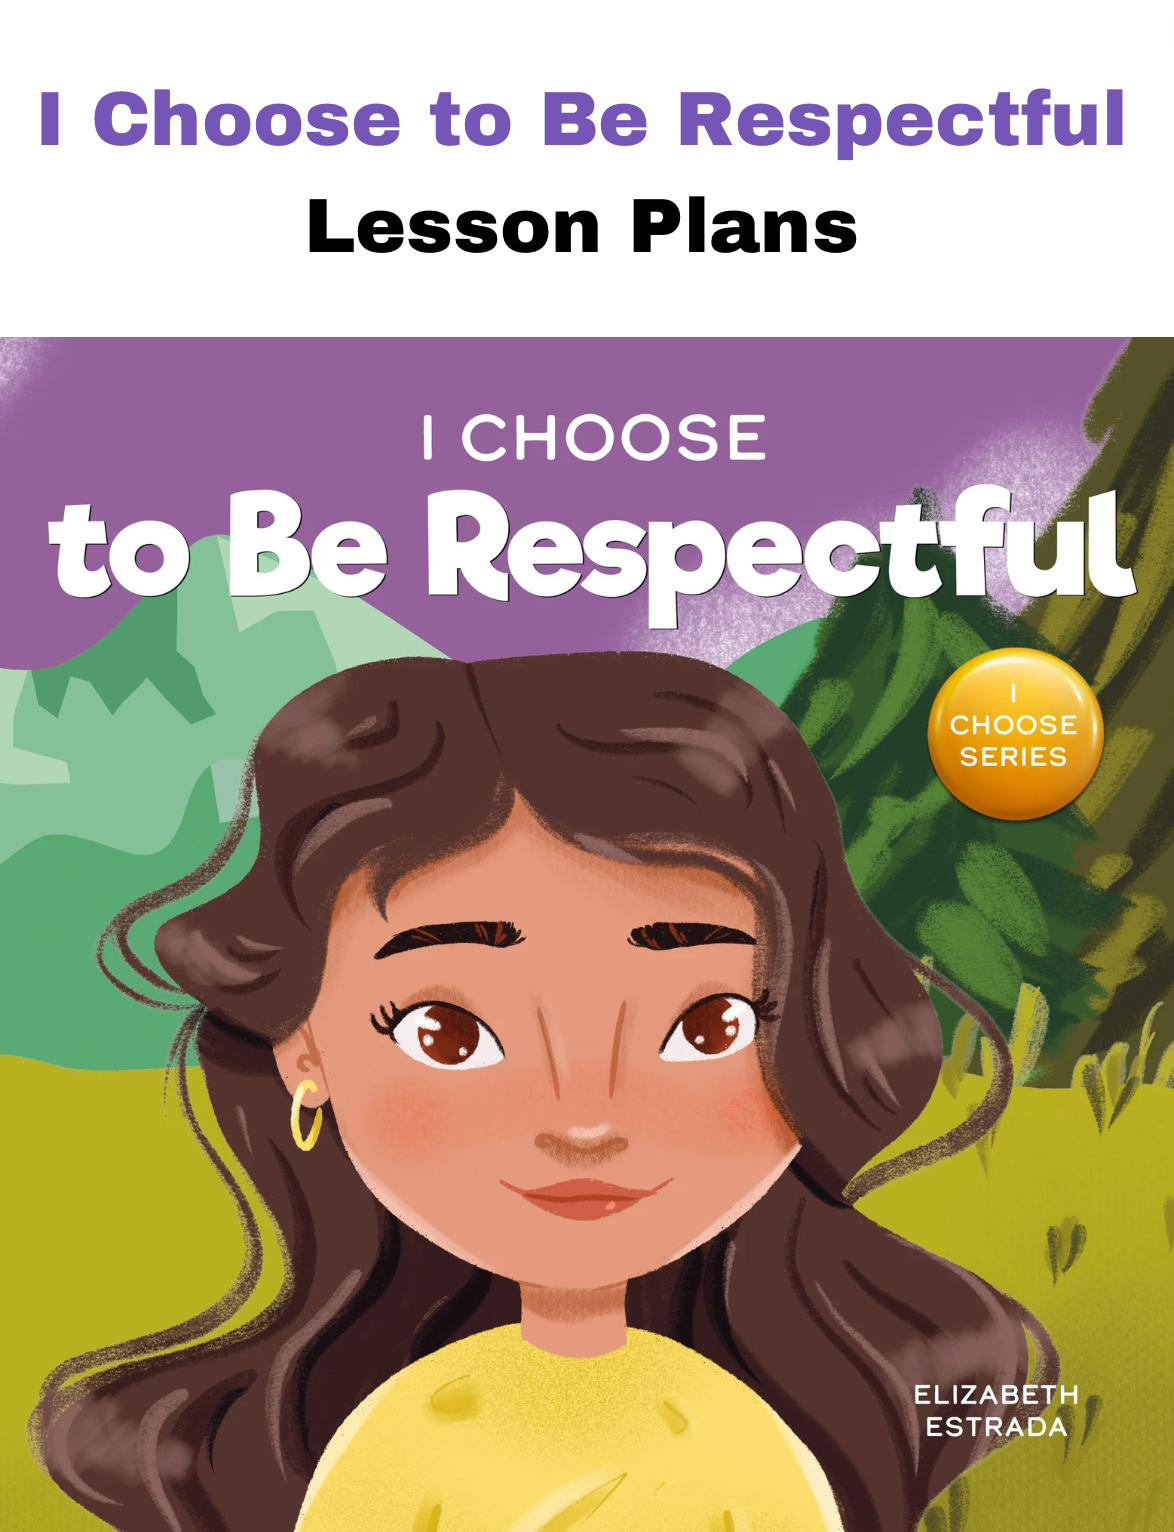 I Choose To Be Respectful SEL Lesson Plan